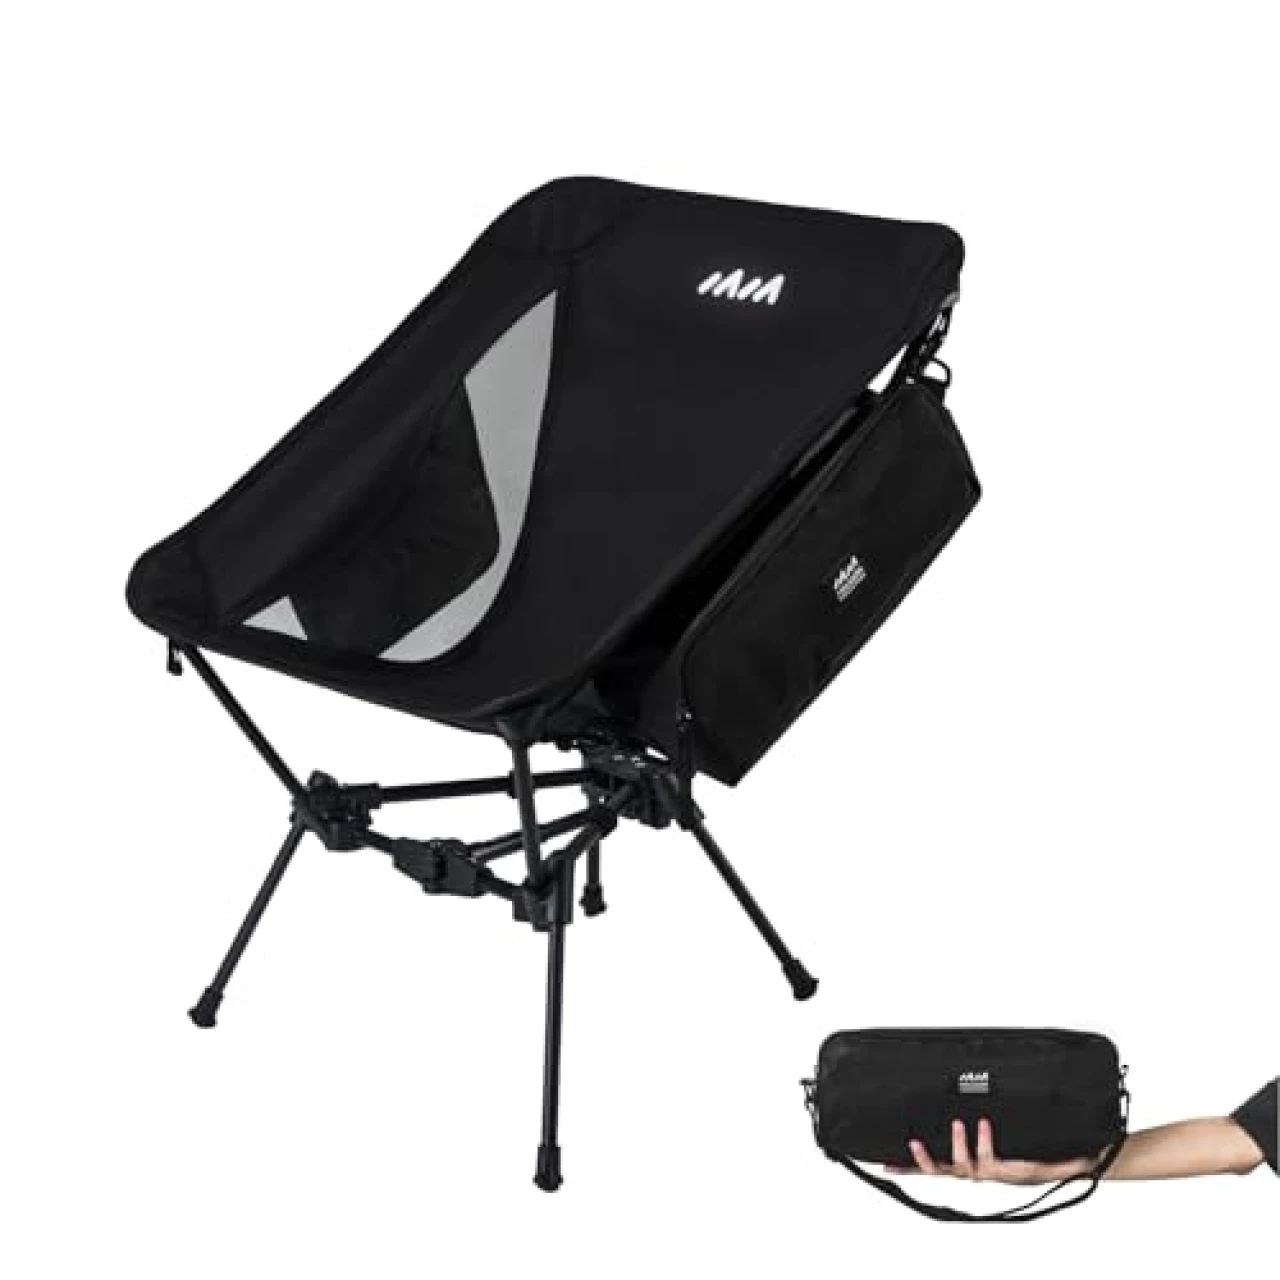 MISSION MOUNTAIN UltraPort Portable Camping Chair, Lightweight Foldable Chair, Ultralight Backpacking Chair for Outdoor Camp, Hiking, Travel, Beach, and Picnic - Compact Design with Carry Bag (Black)